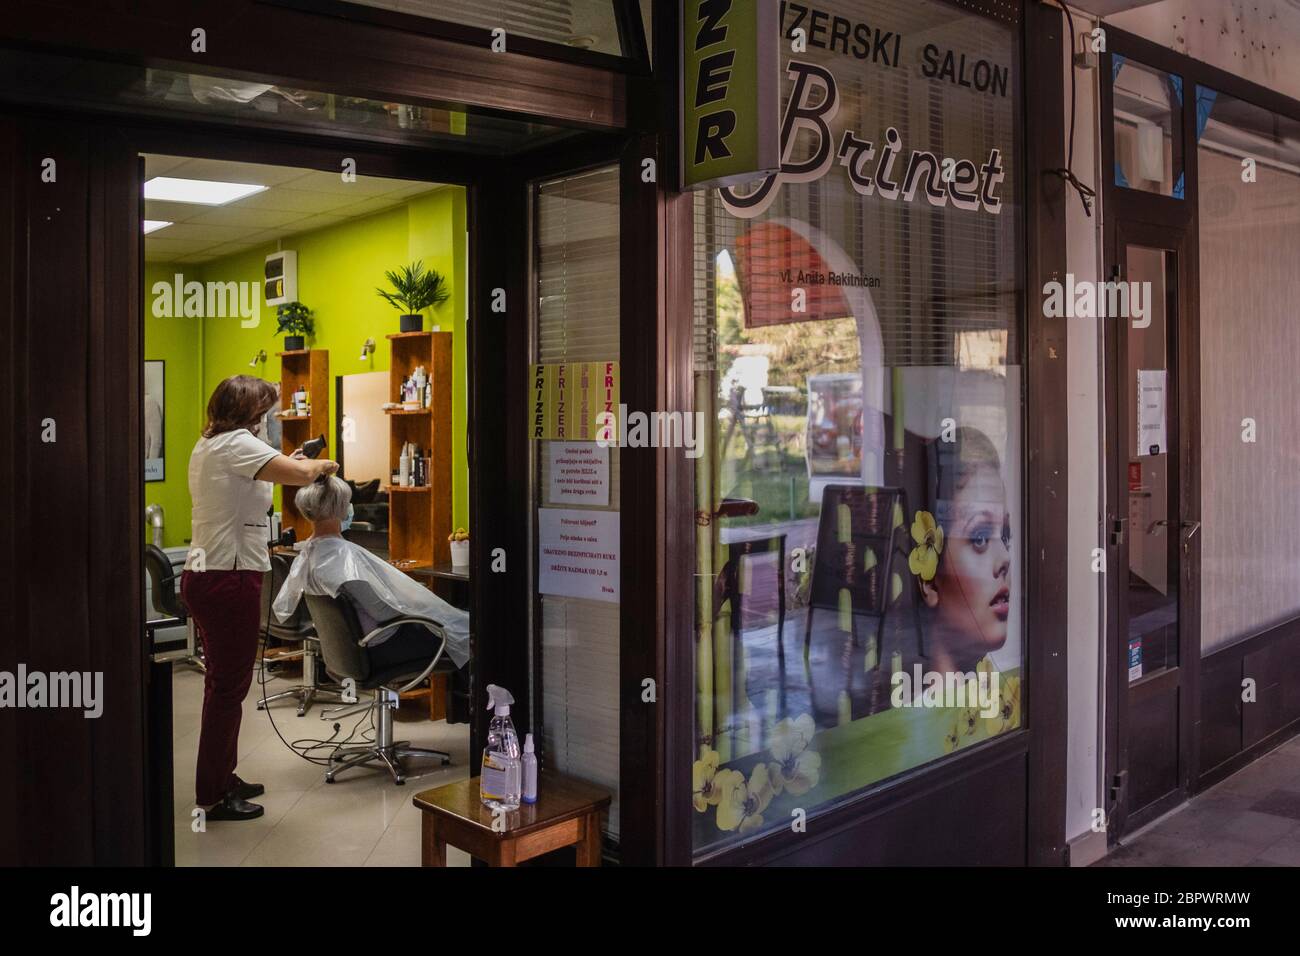 It is the first day back to work in Croatia for hair salon's and barber shops during the Covid19 pandemic. Only one person is allowed in to the Salon per appointment, and one barber or hairdresser. Croatia. Stock Photo